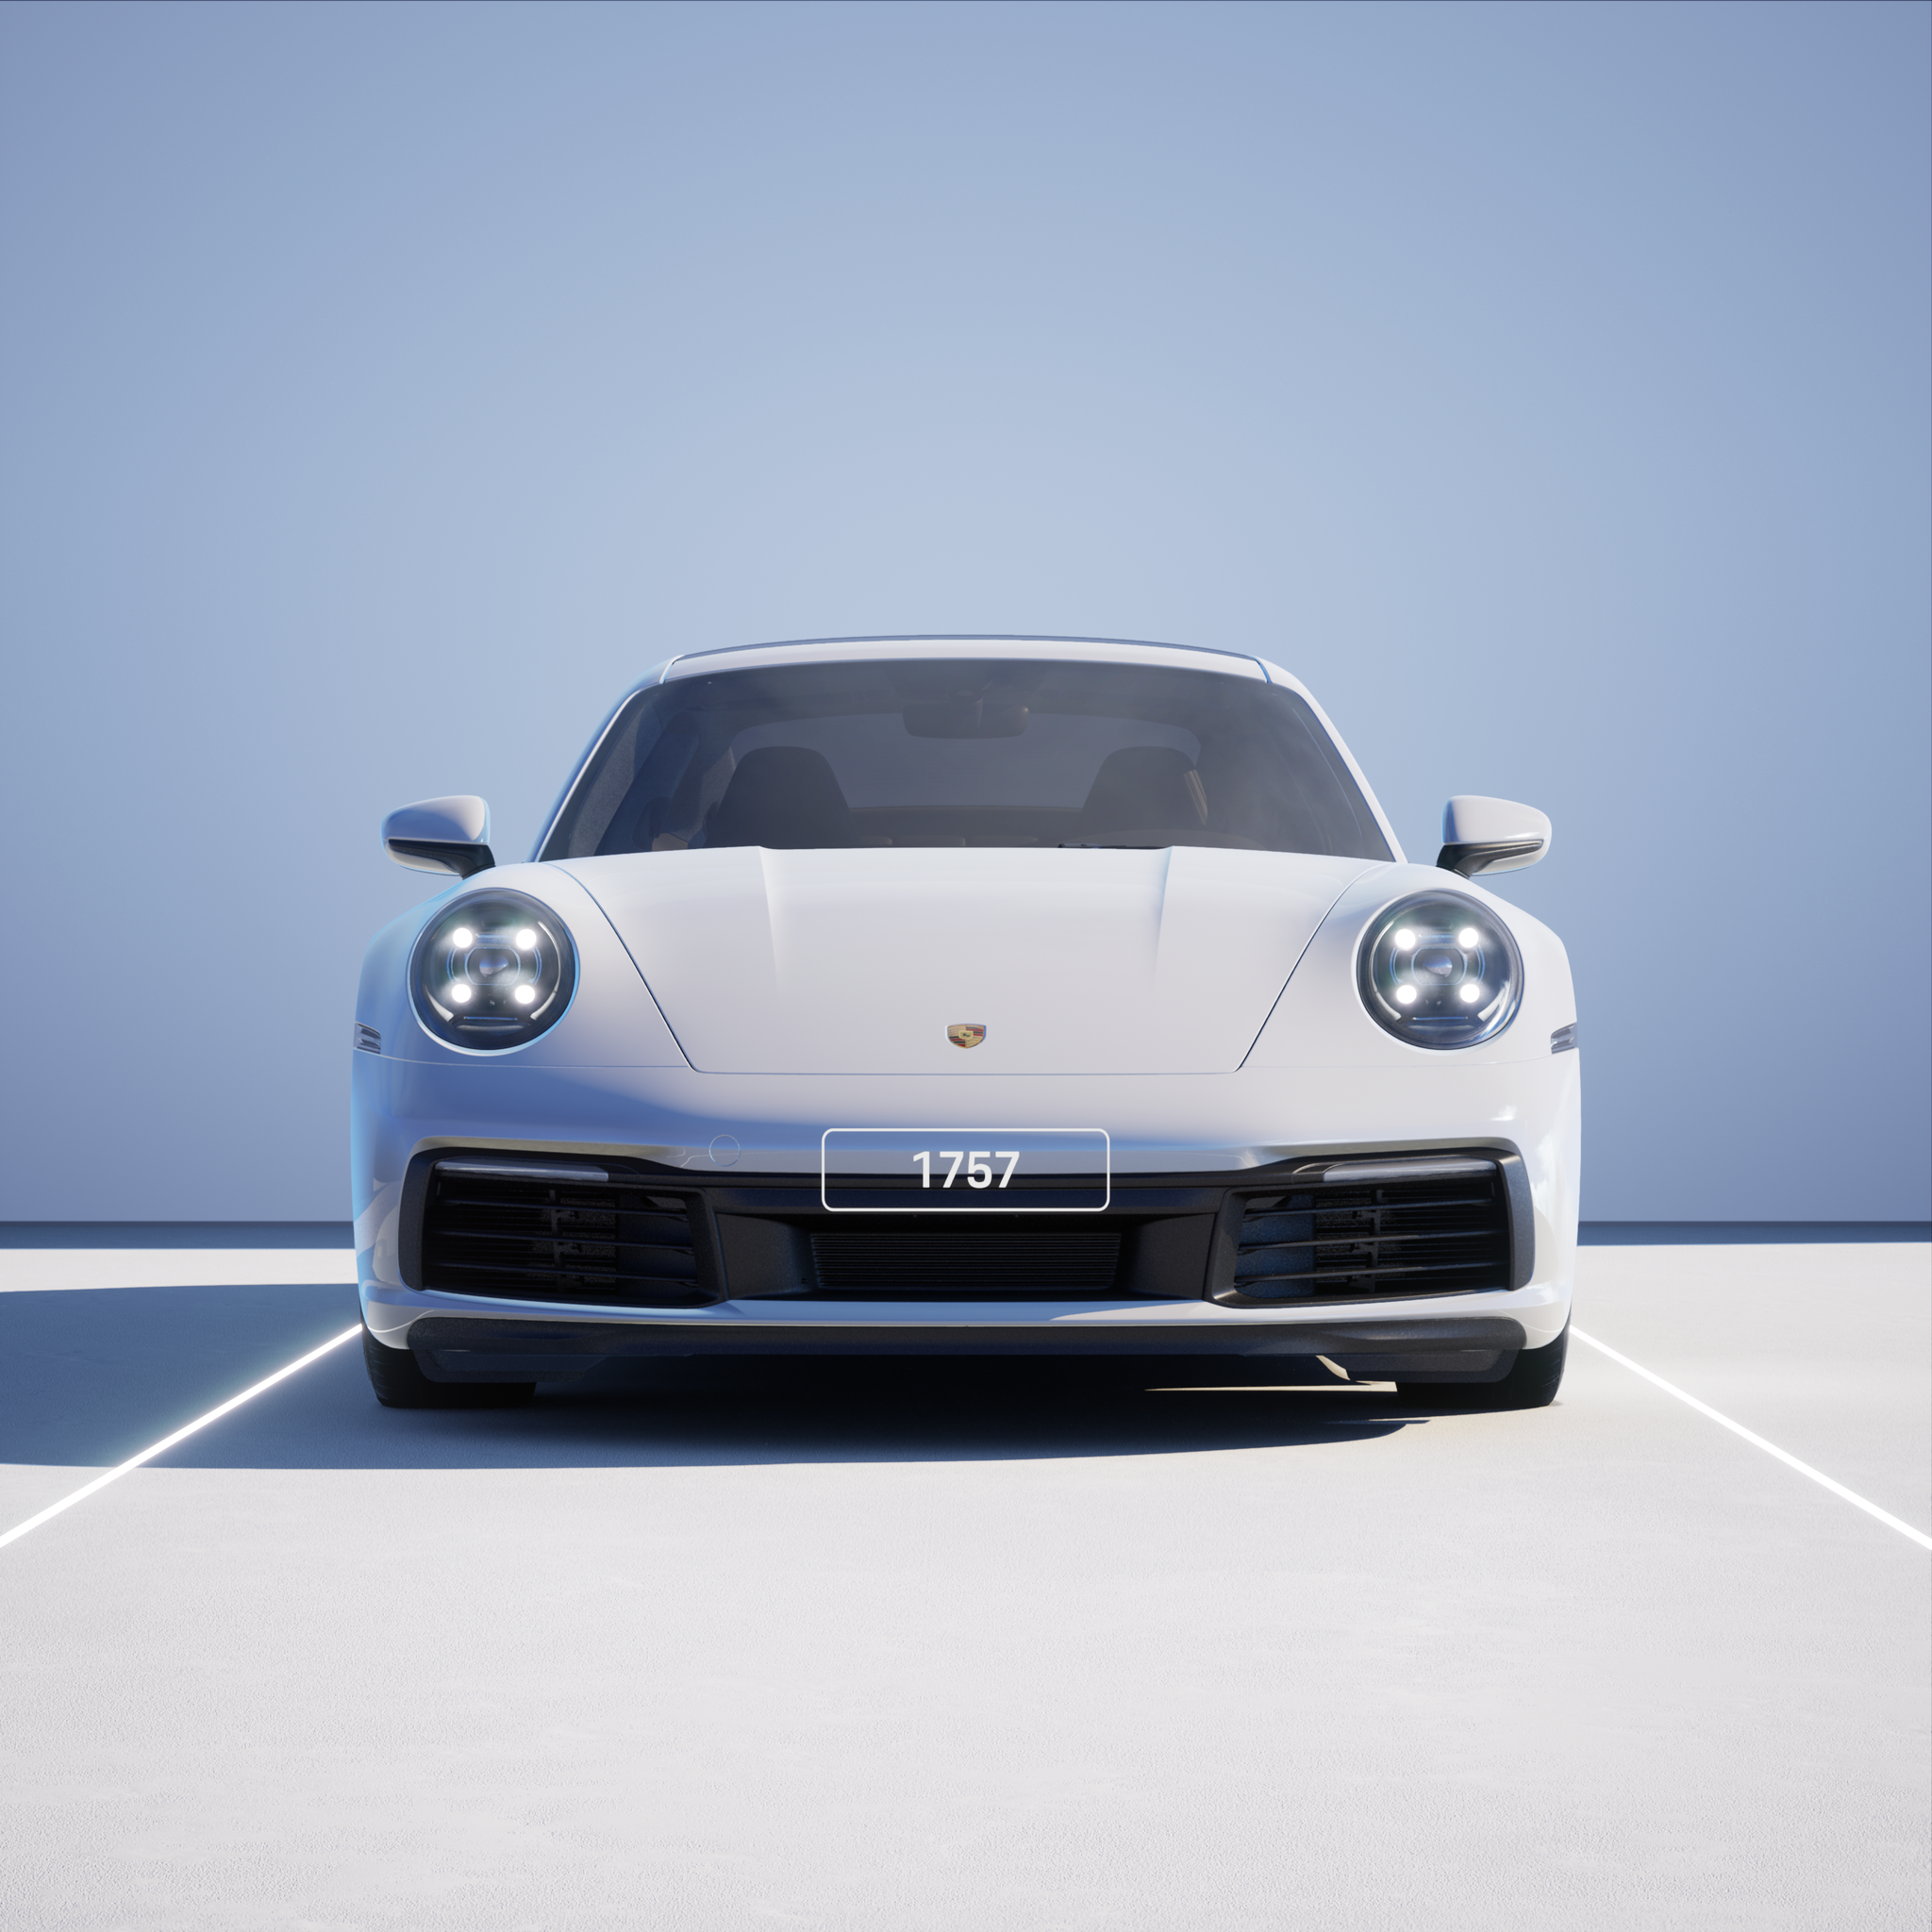 The PORSCHΞ 911 1757 image in phase